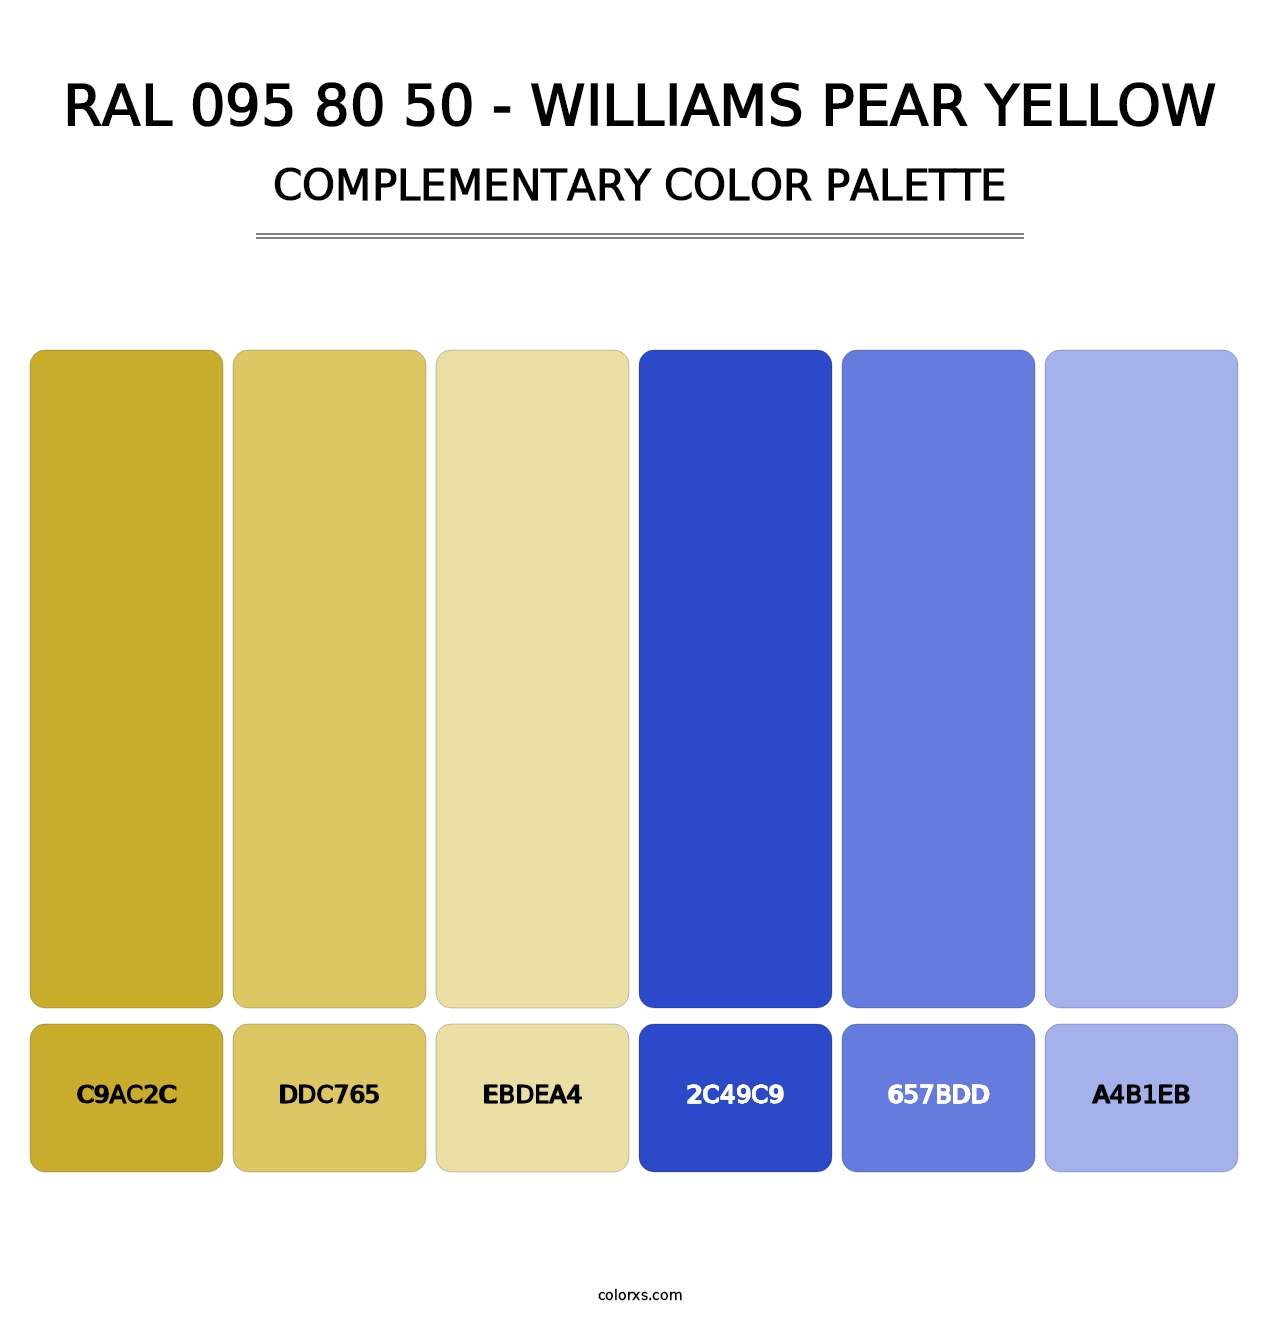 RAL 095 80 50 - Williams Pear Yellow - Complementary Color Palette